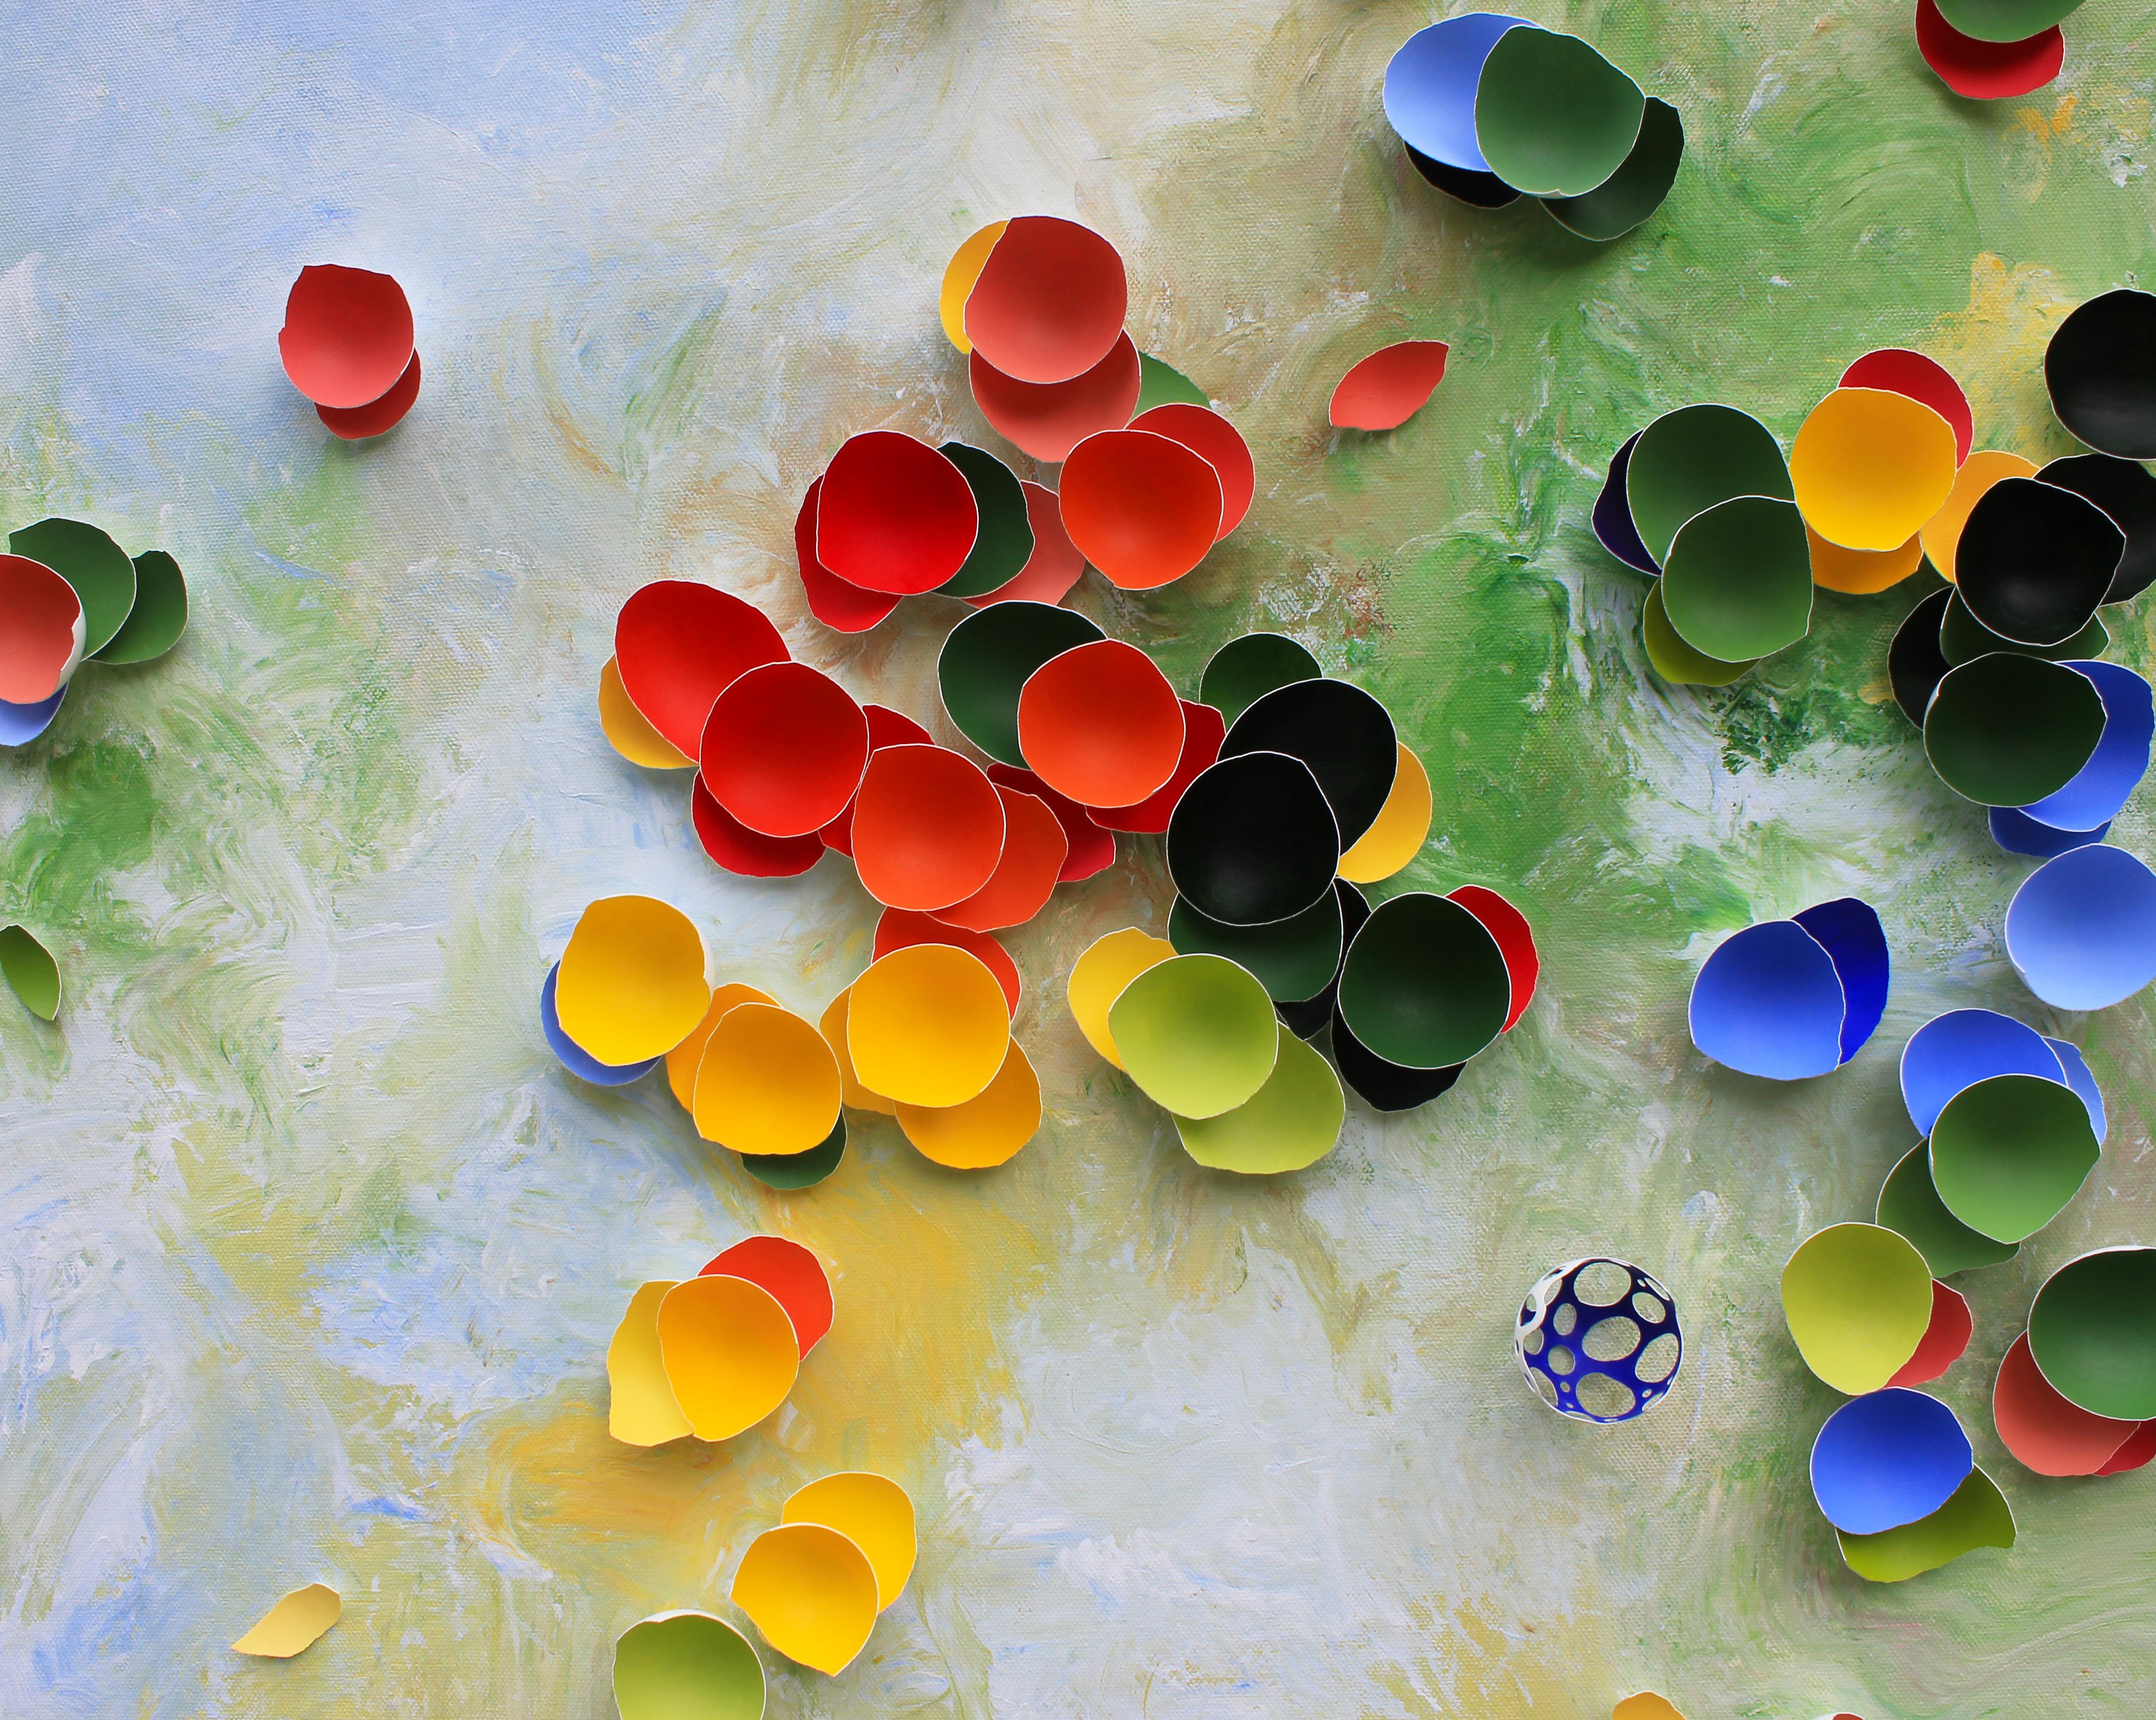 Contemporary Blooming Garden IV by Larisa Safaryan  Acrylic paint and eggshells on canvas